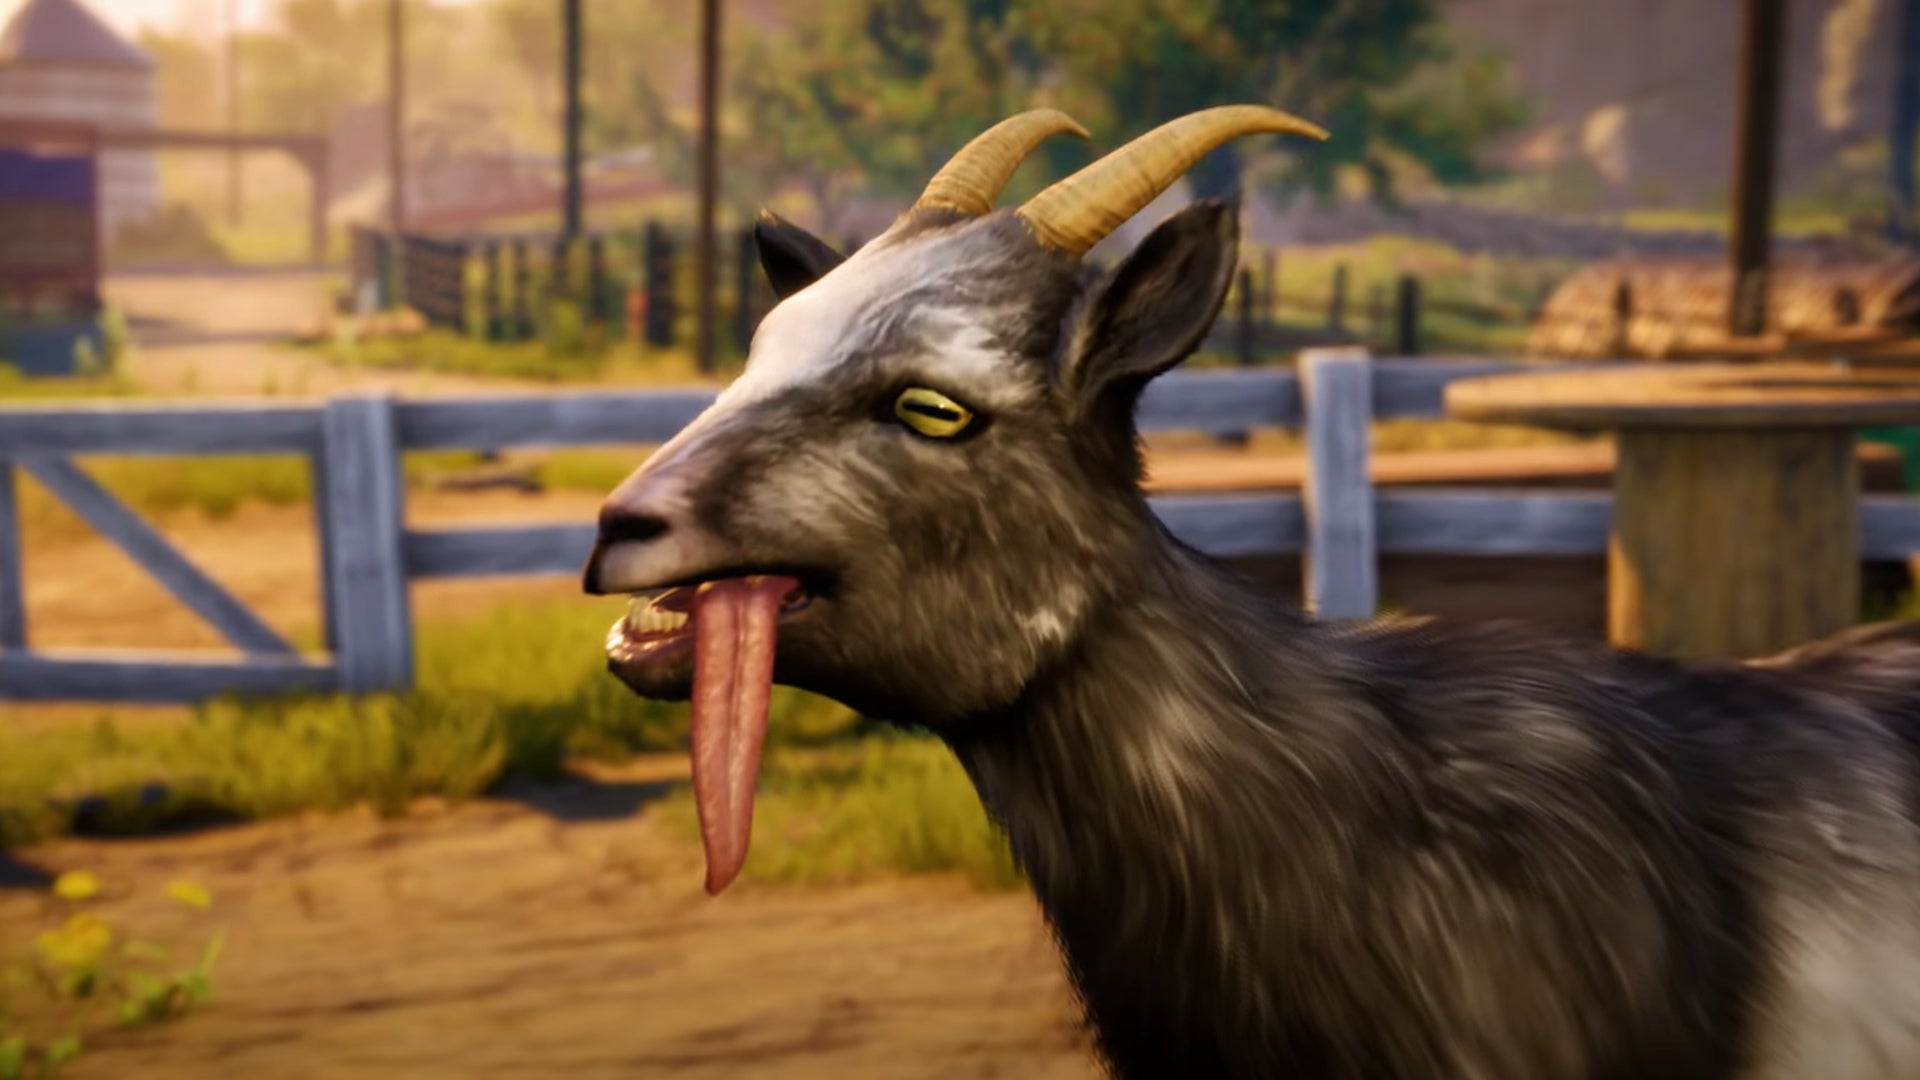 Goat Simulator 3 is the second game in the series, arriving on November 17th, 2022.